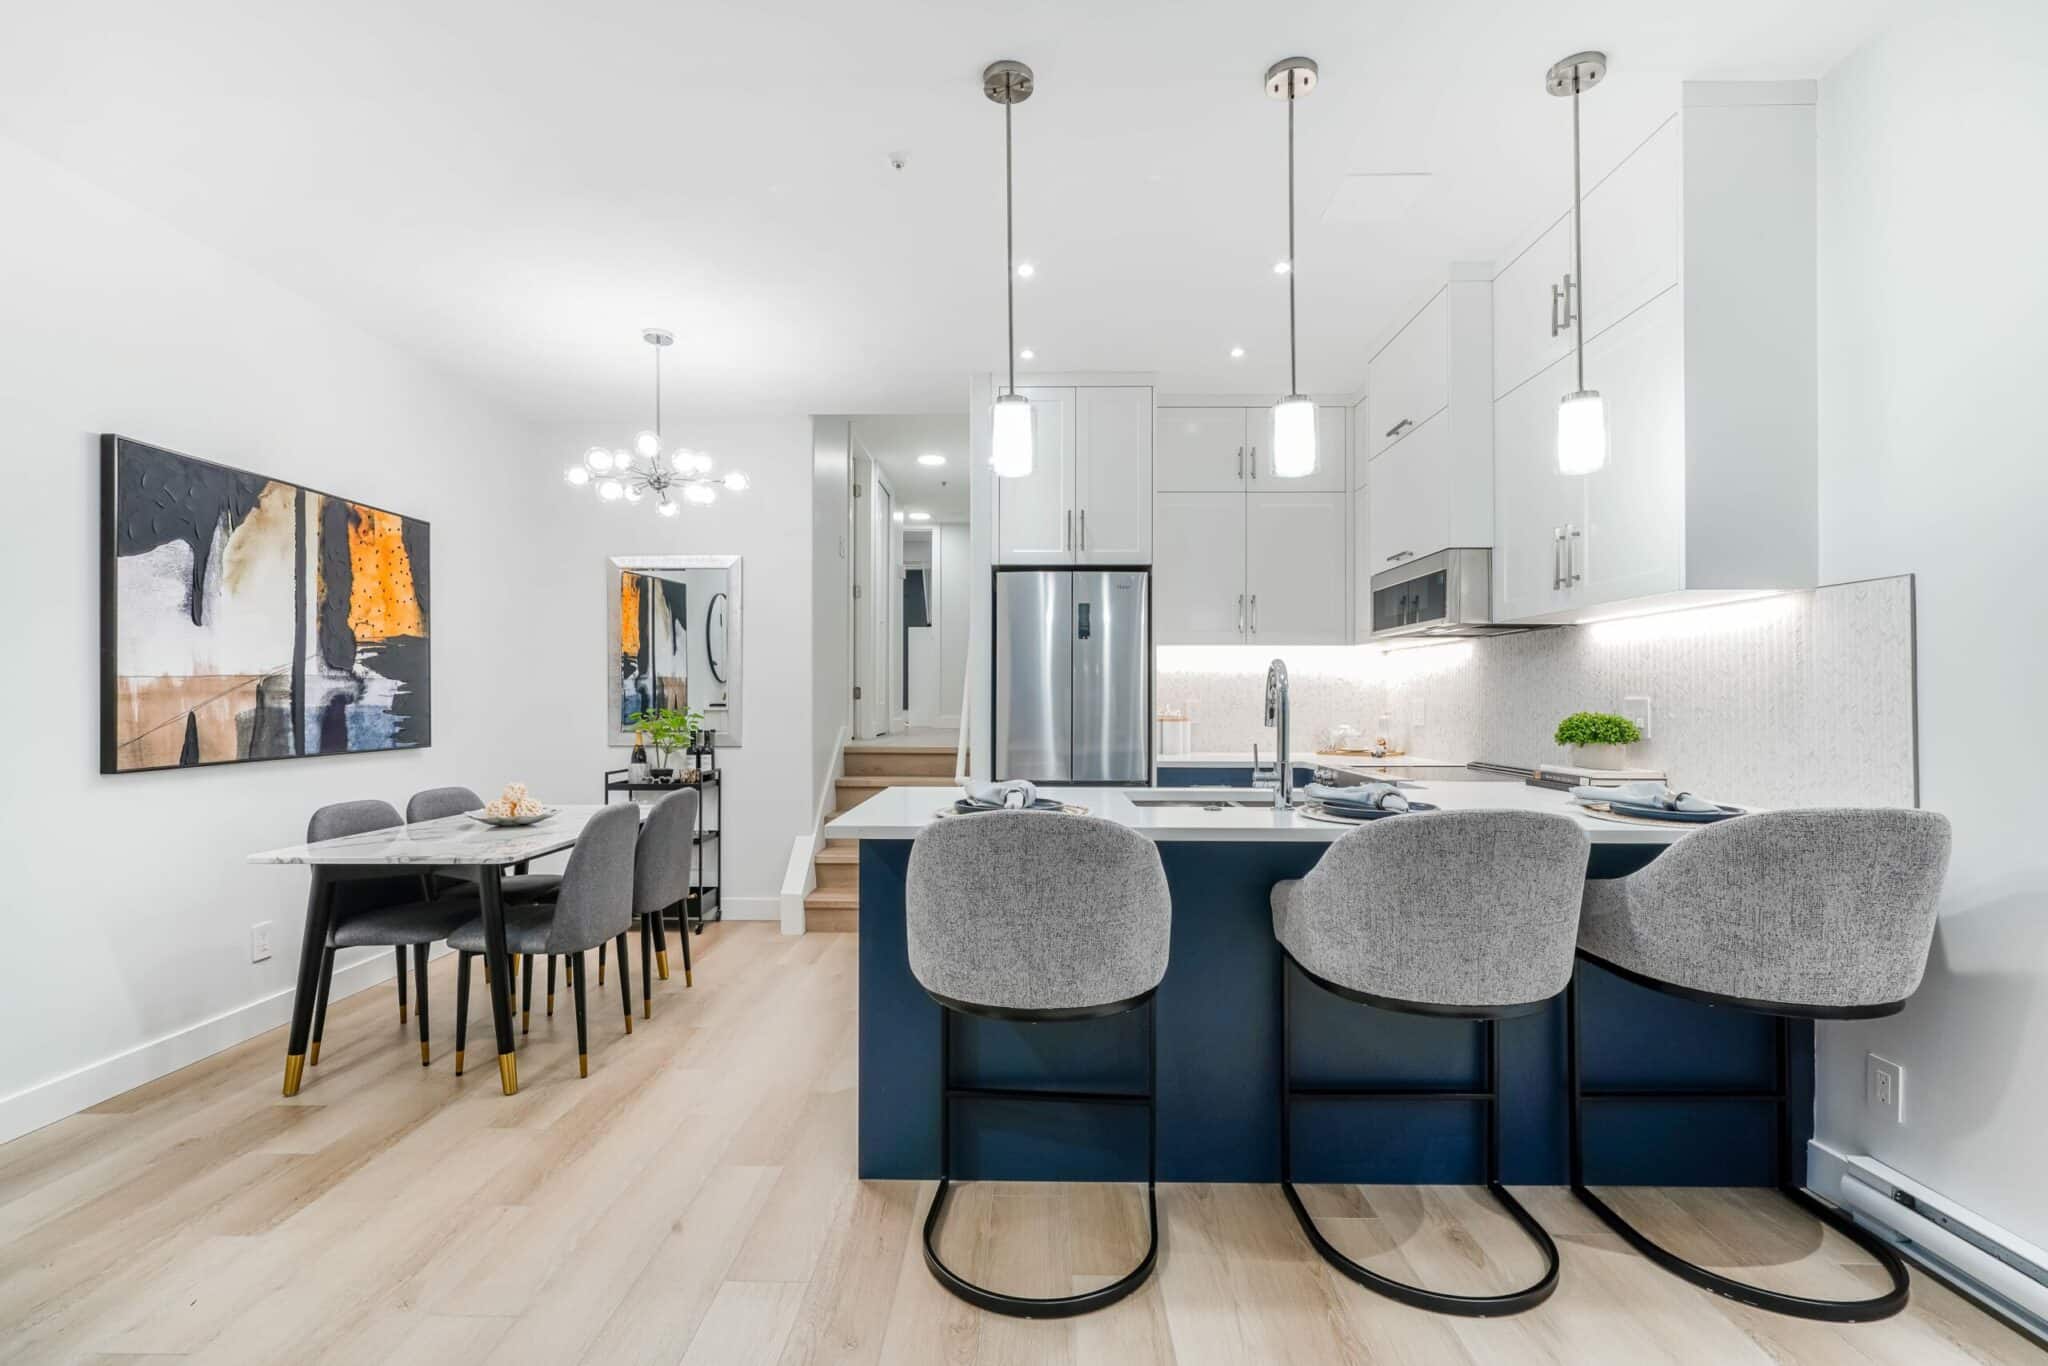 dining-room-kitchen-two-tone-navy-white-transitional-traditional-staging-downtown-renovation